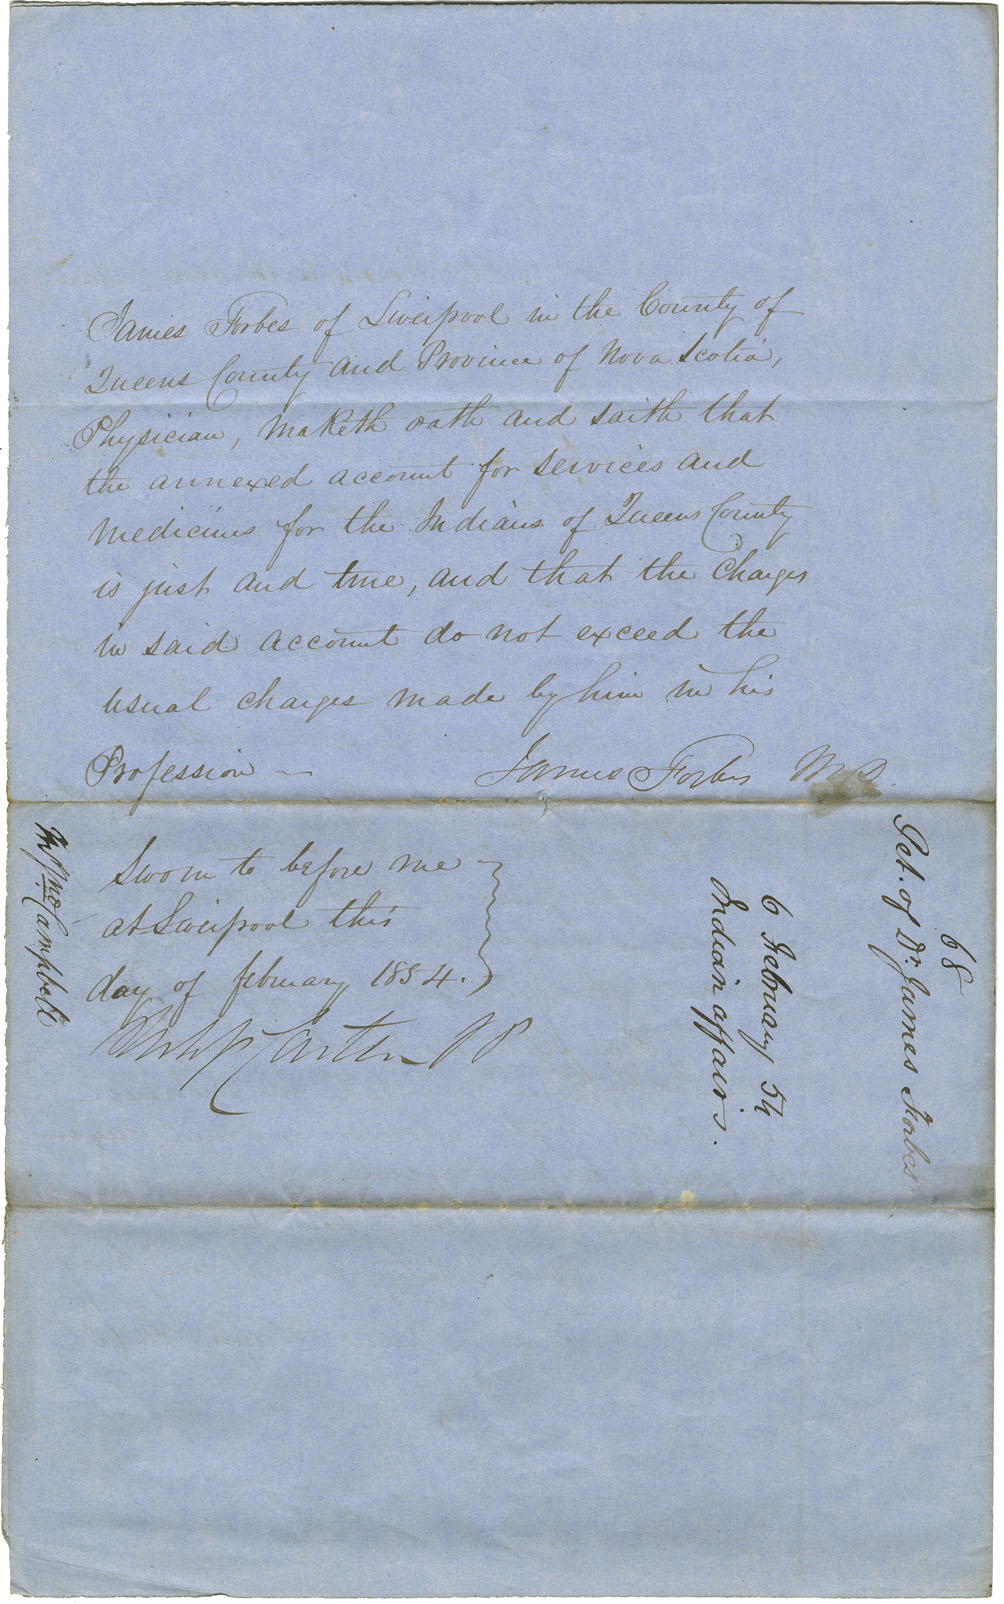 Petition of Dr. Forbes of Liverpool for payment for services to Mi'kmaq.